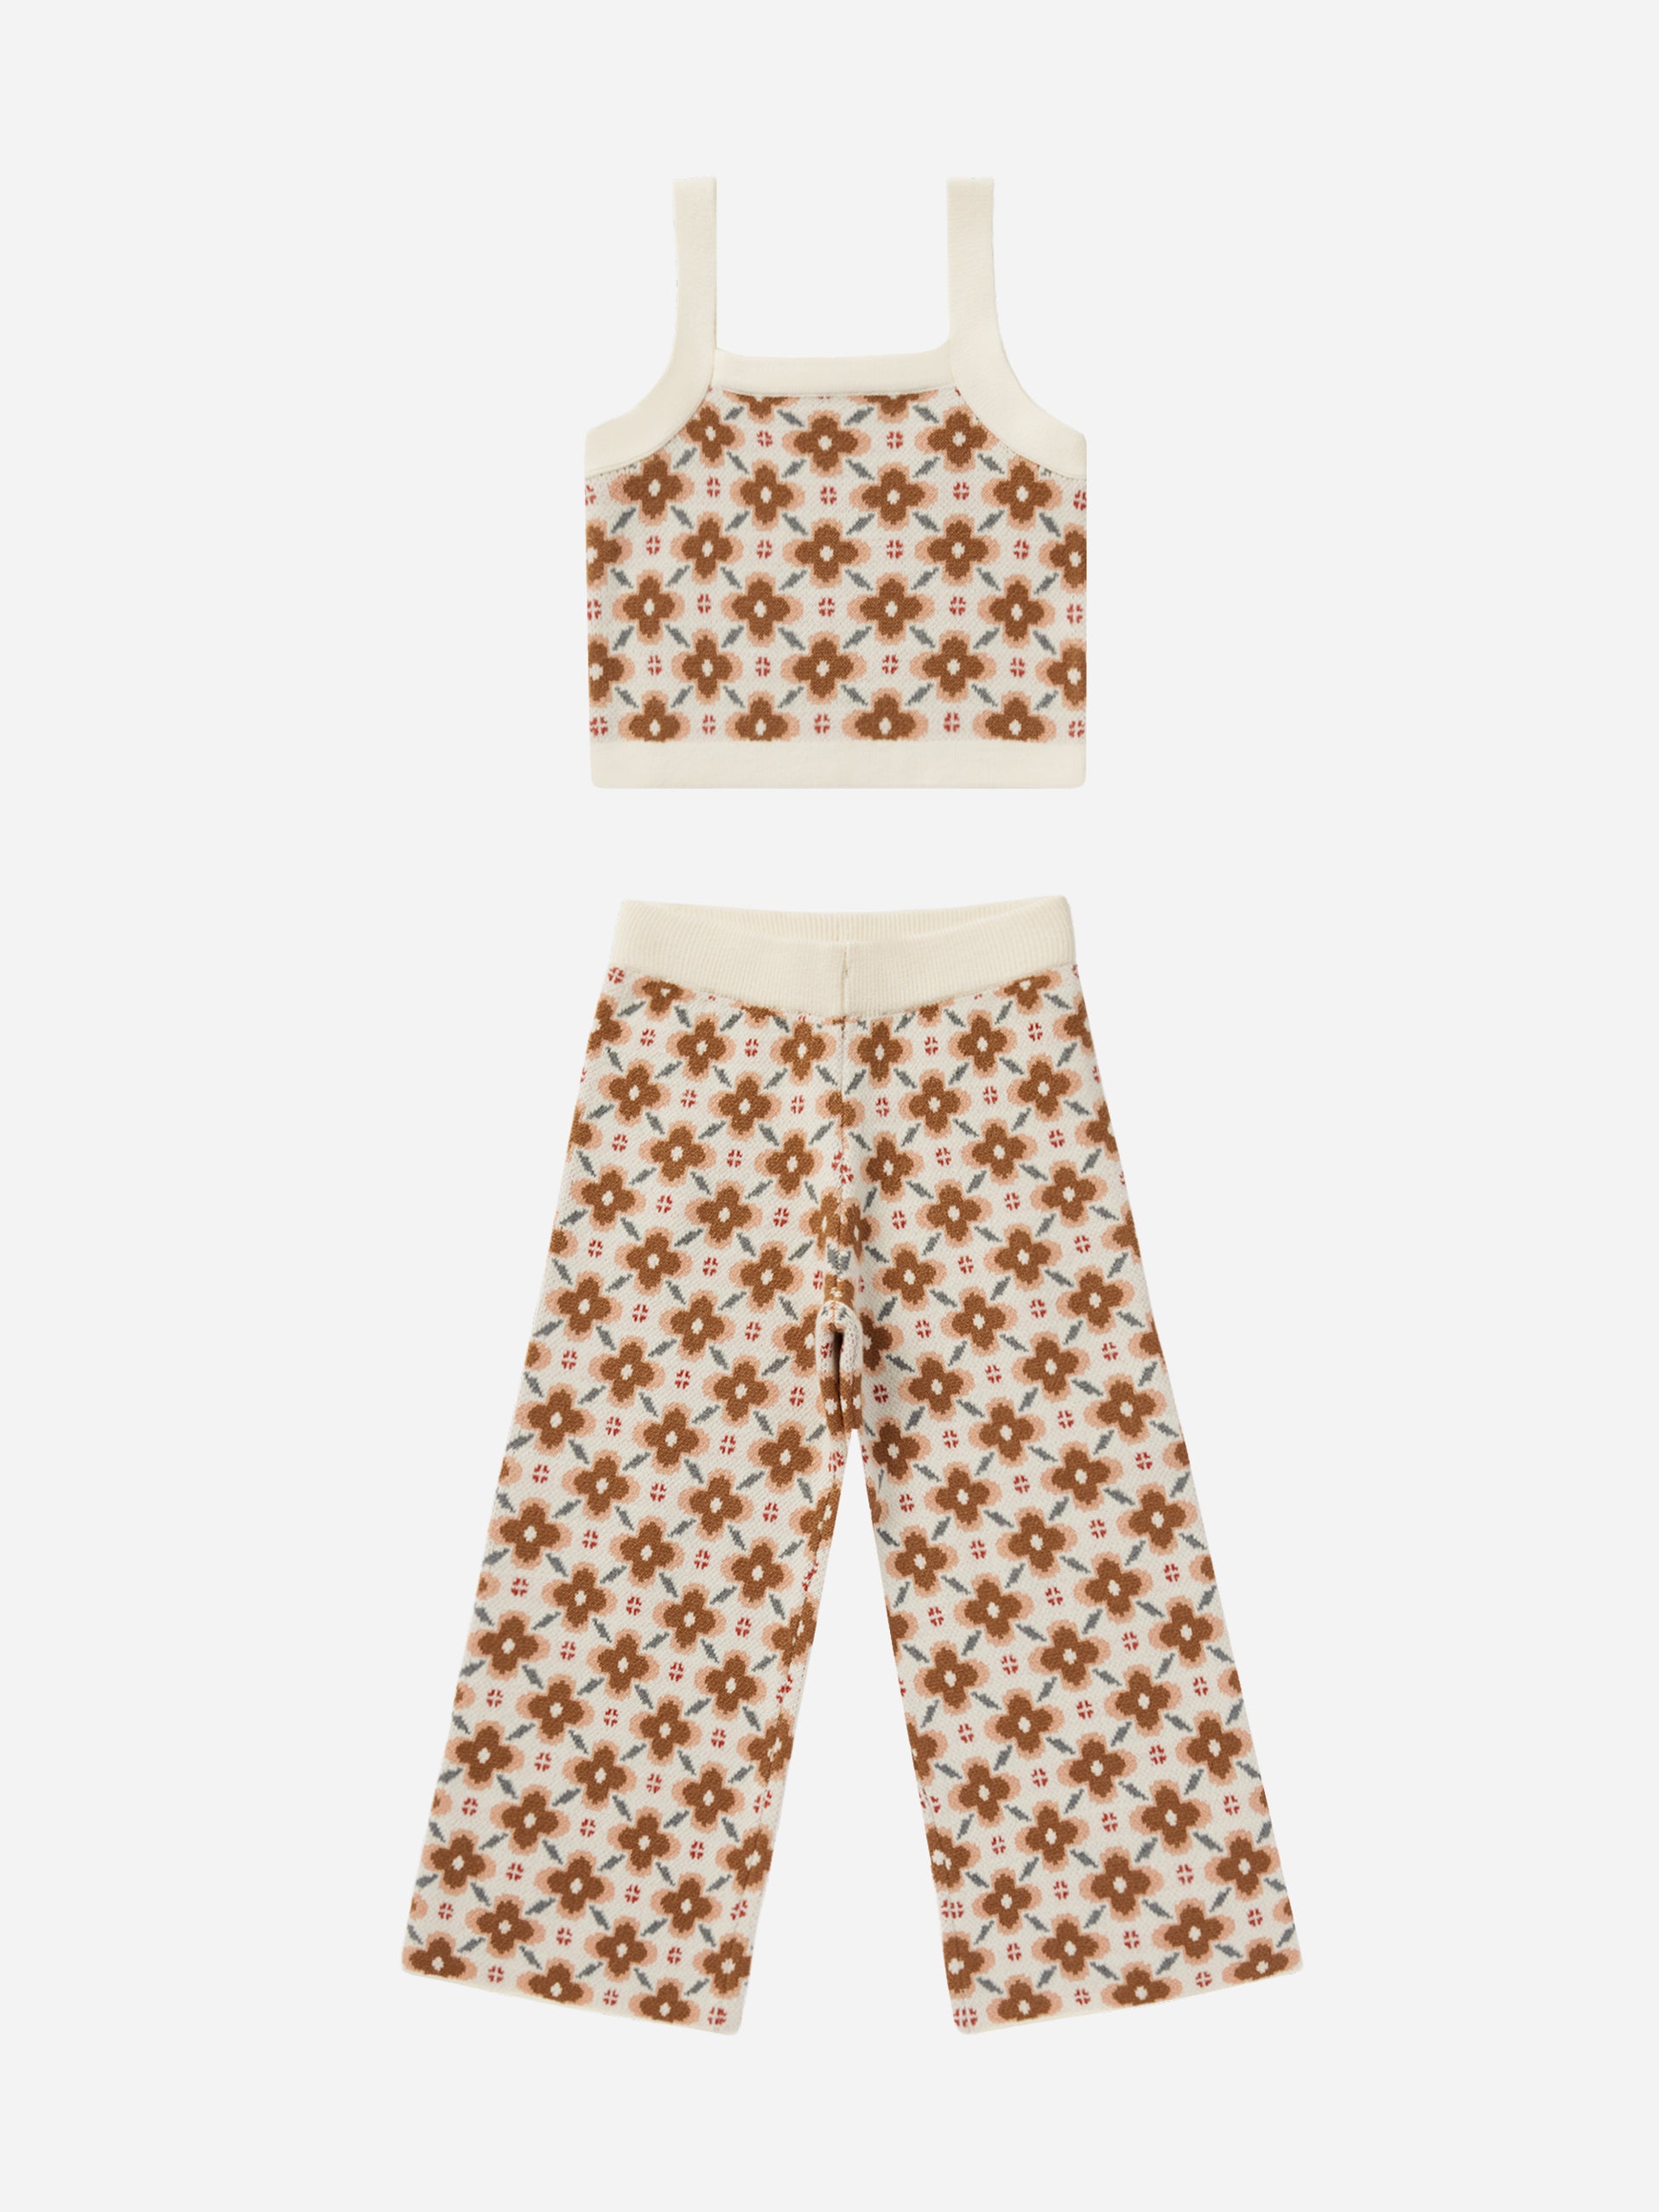 Kelsi Knit Set || Mosaic - Rylee + Cru | Kids Clothes | Trendy Baby Clothes | Modern Infant Outfits |